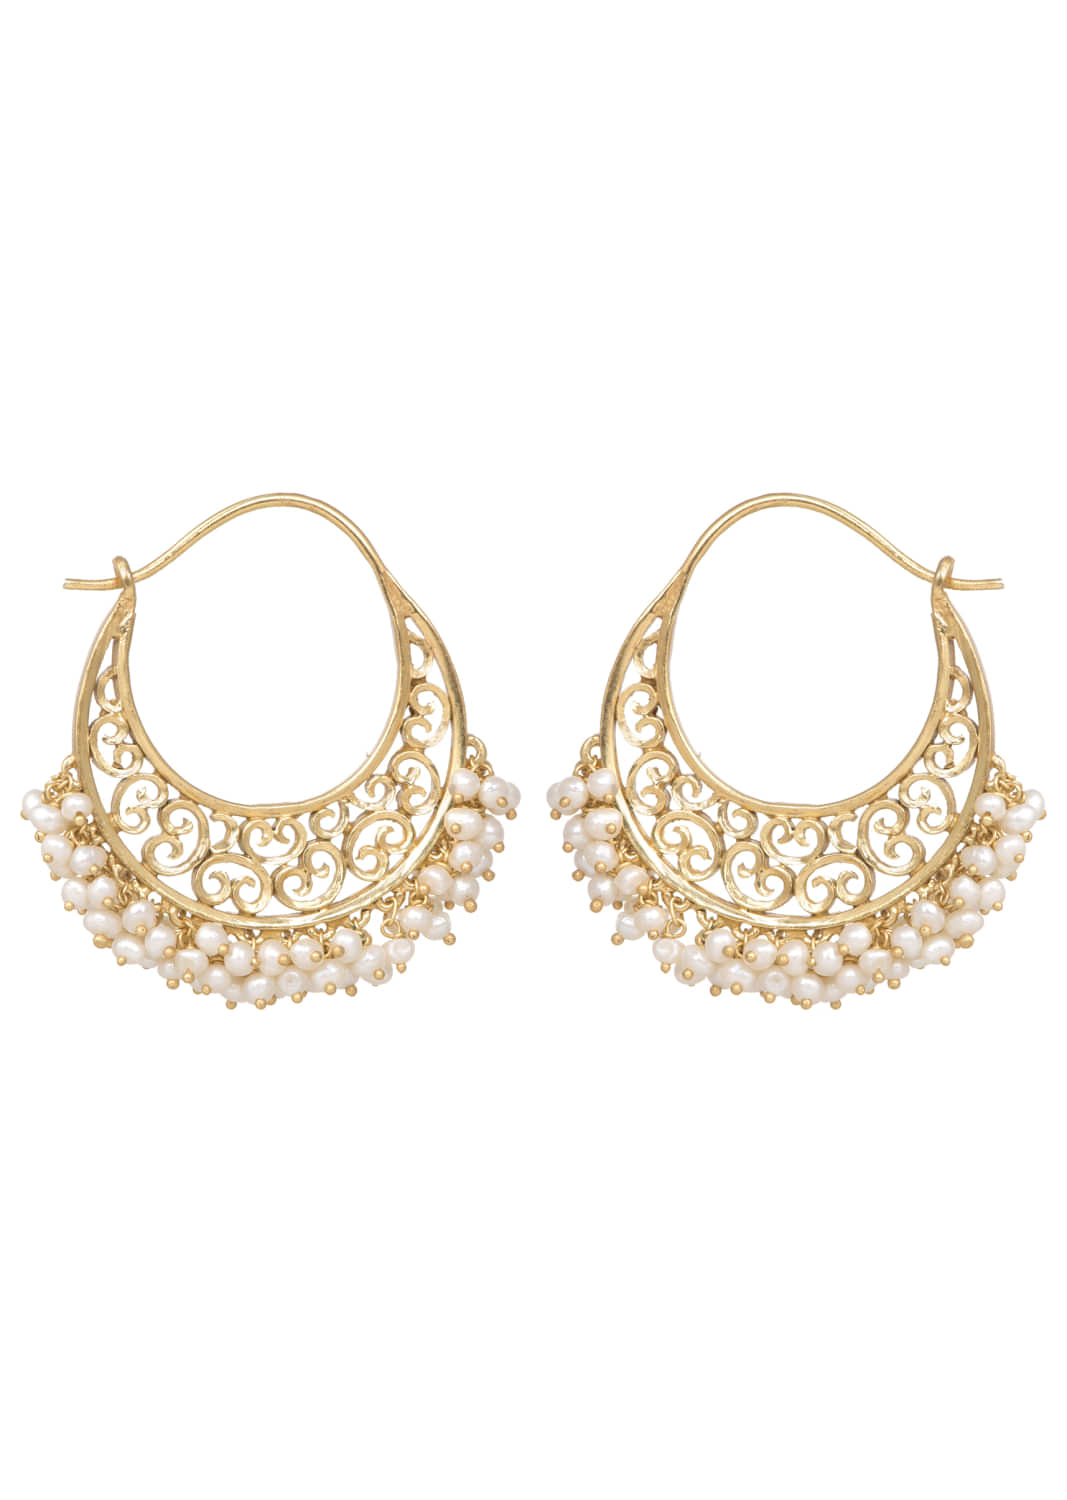 Gold Plated Hoop Earrings With Filigree Design And Pearls On The Edge By Zariin